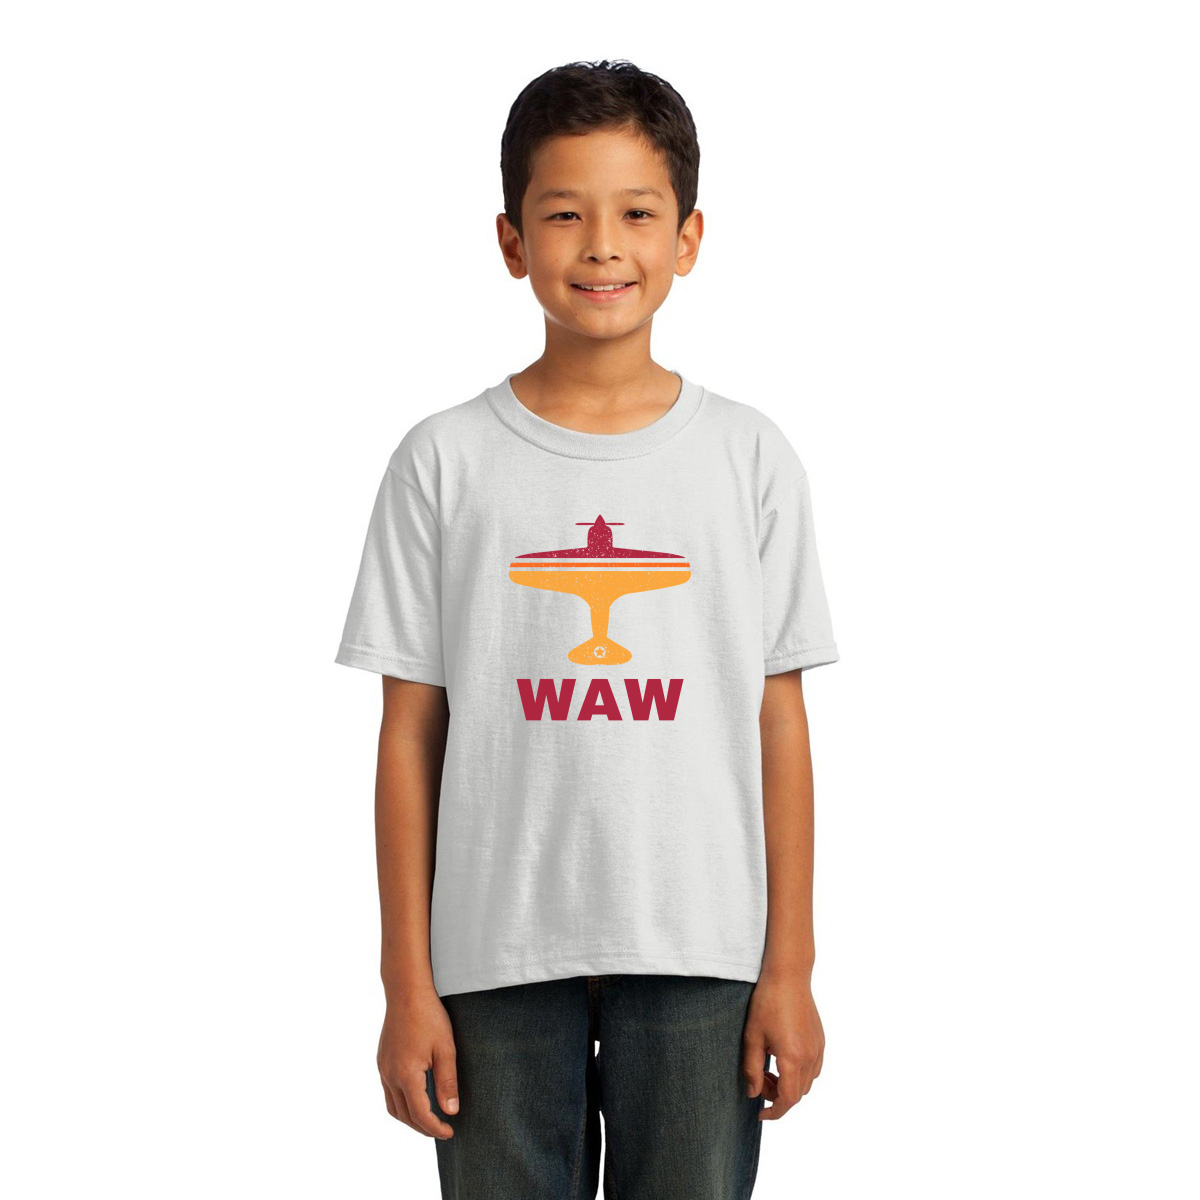 Fly Warsaw WAW Airport Kids T-shirt | White